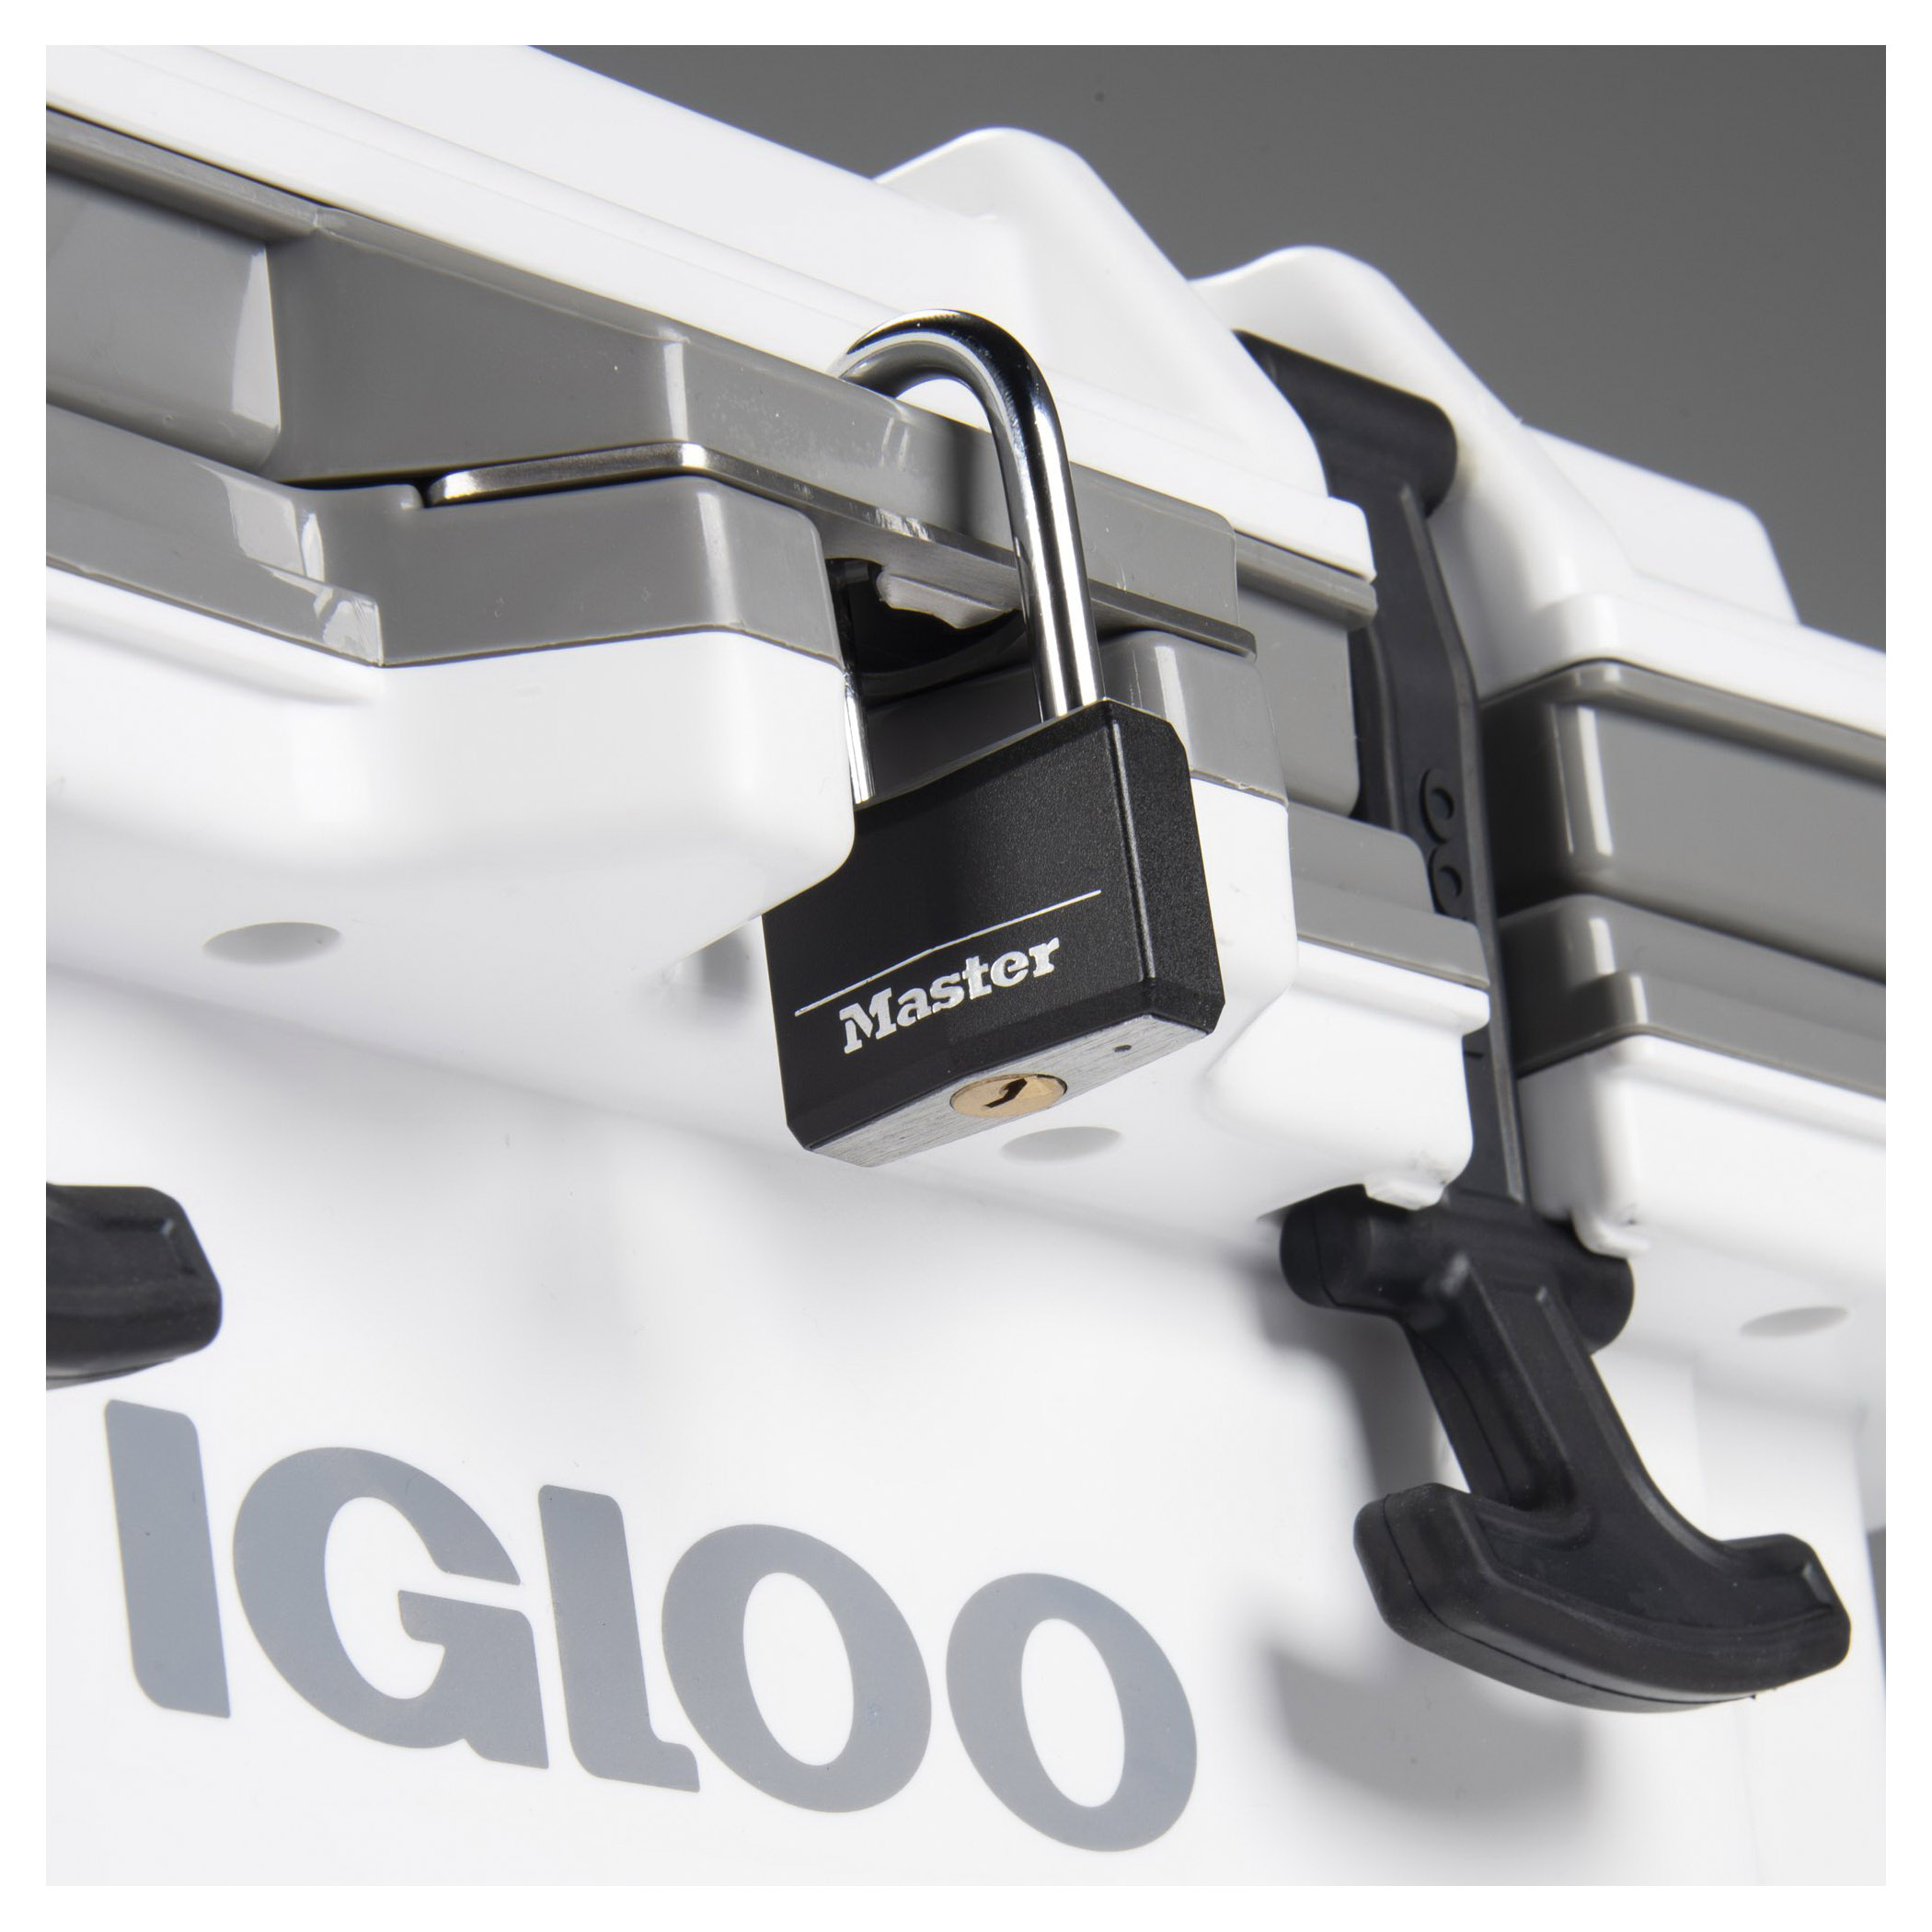 IGLOO IMX 49829 Cooler, 7.3 kg Cooler, Rubber/Stainless Steel, White - 4